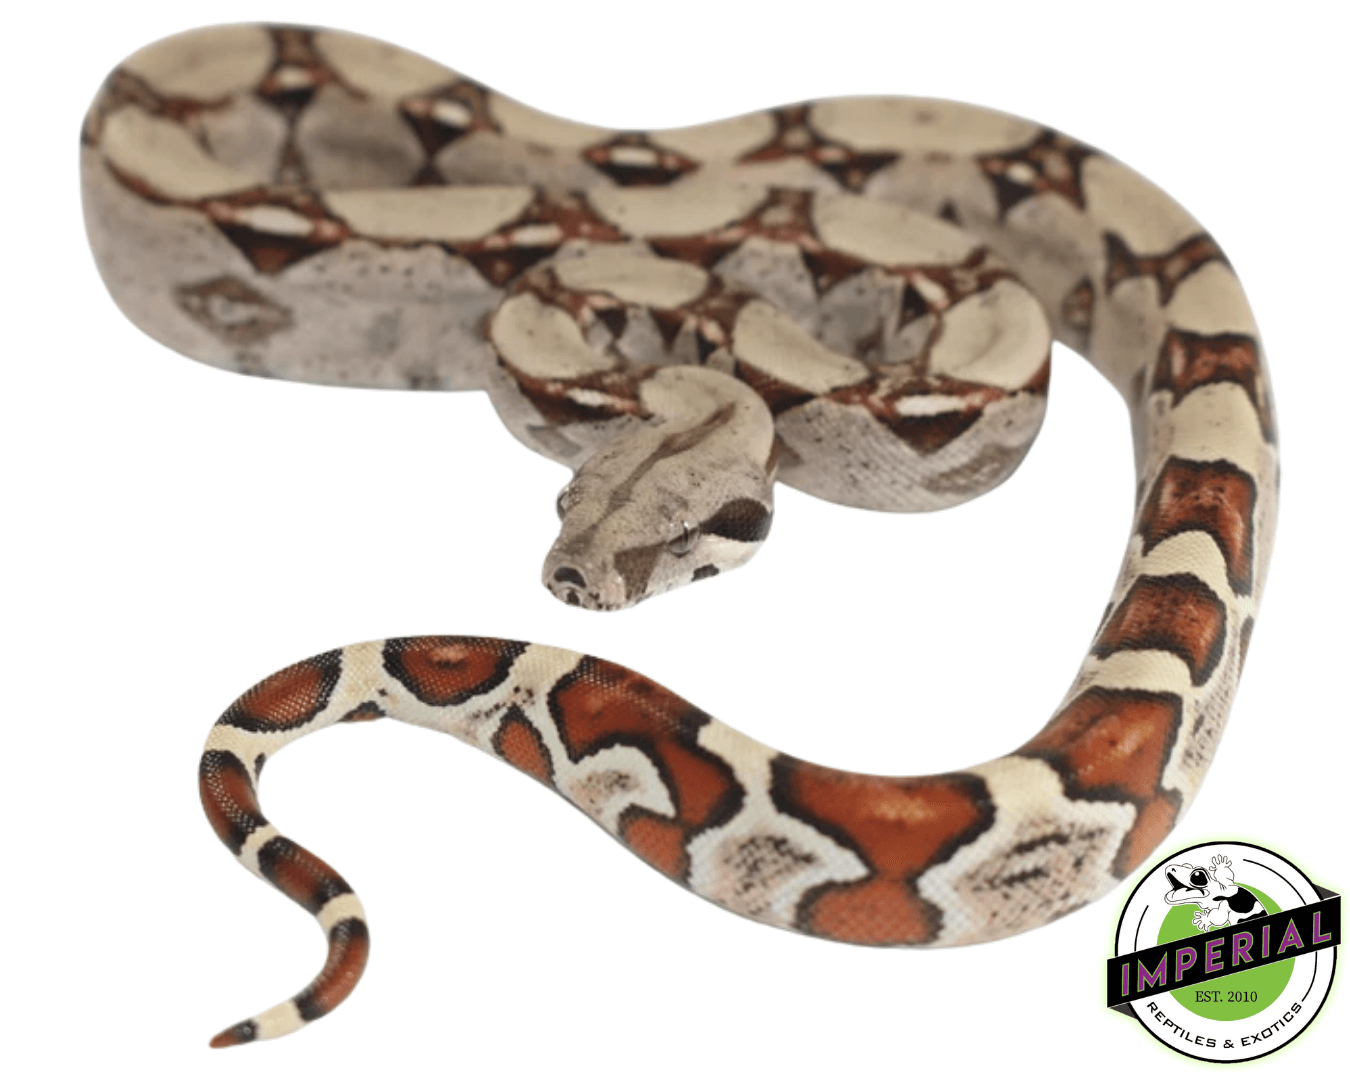 colombian red tail boa constrictor for sale, buy reptiles online